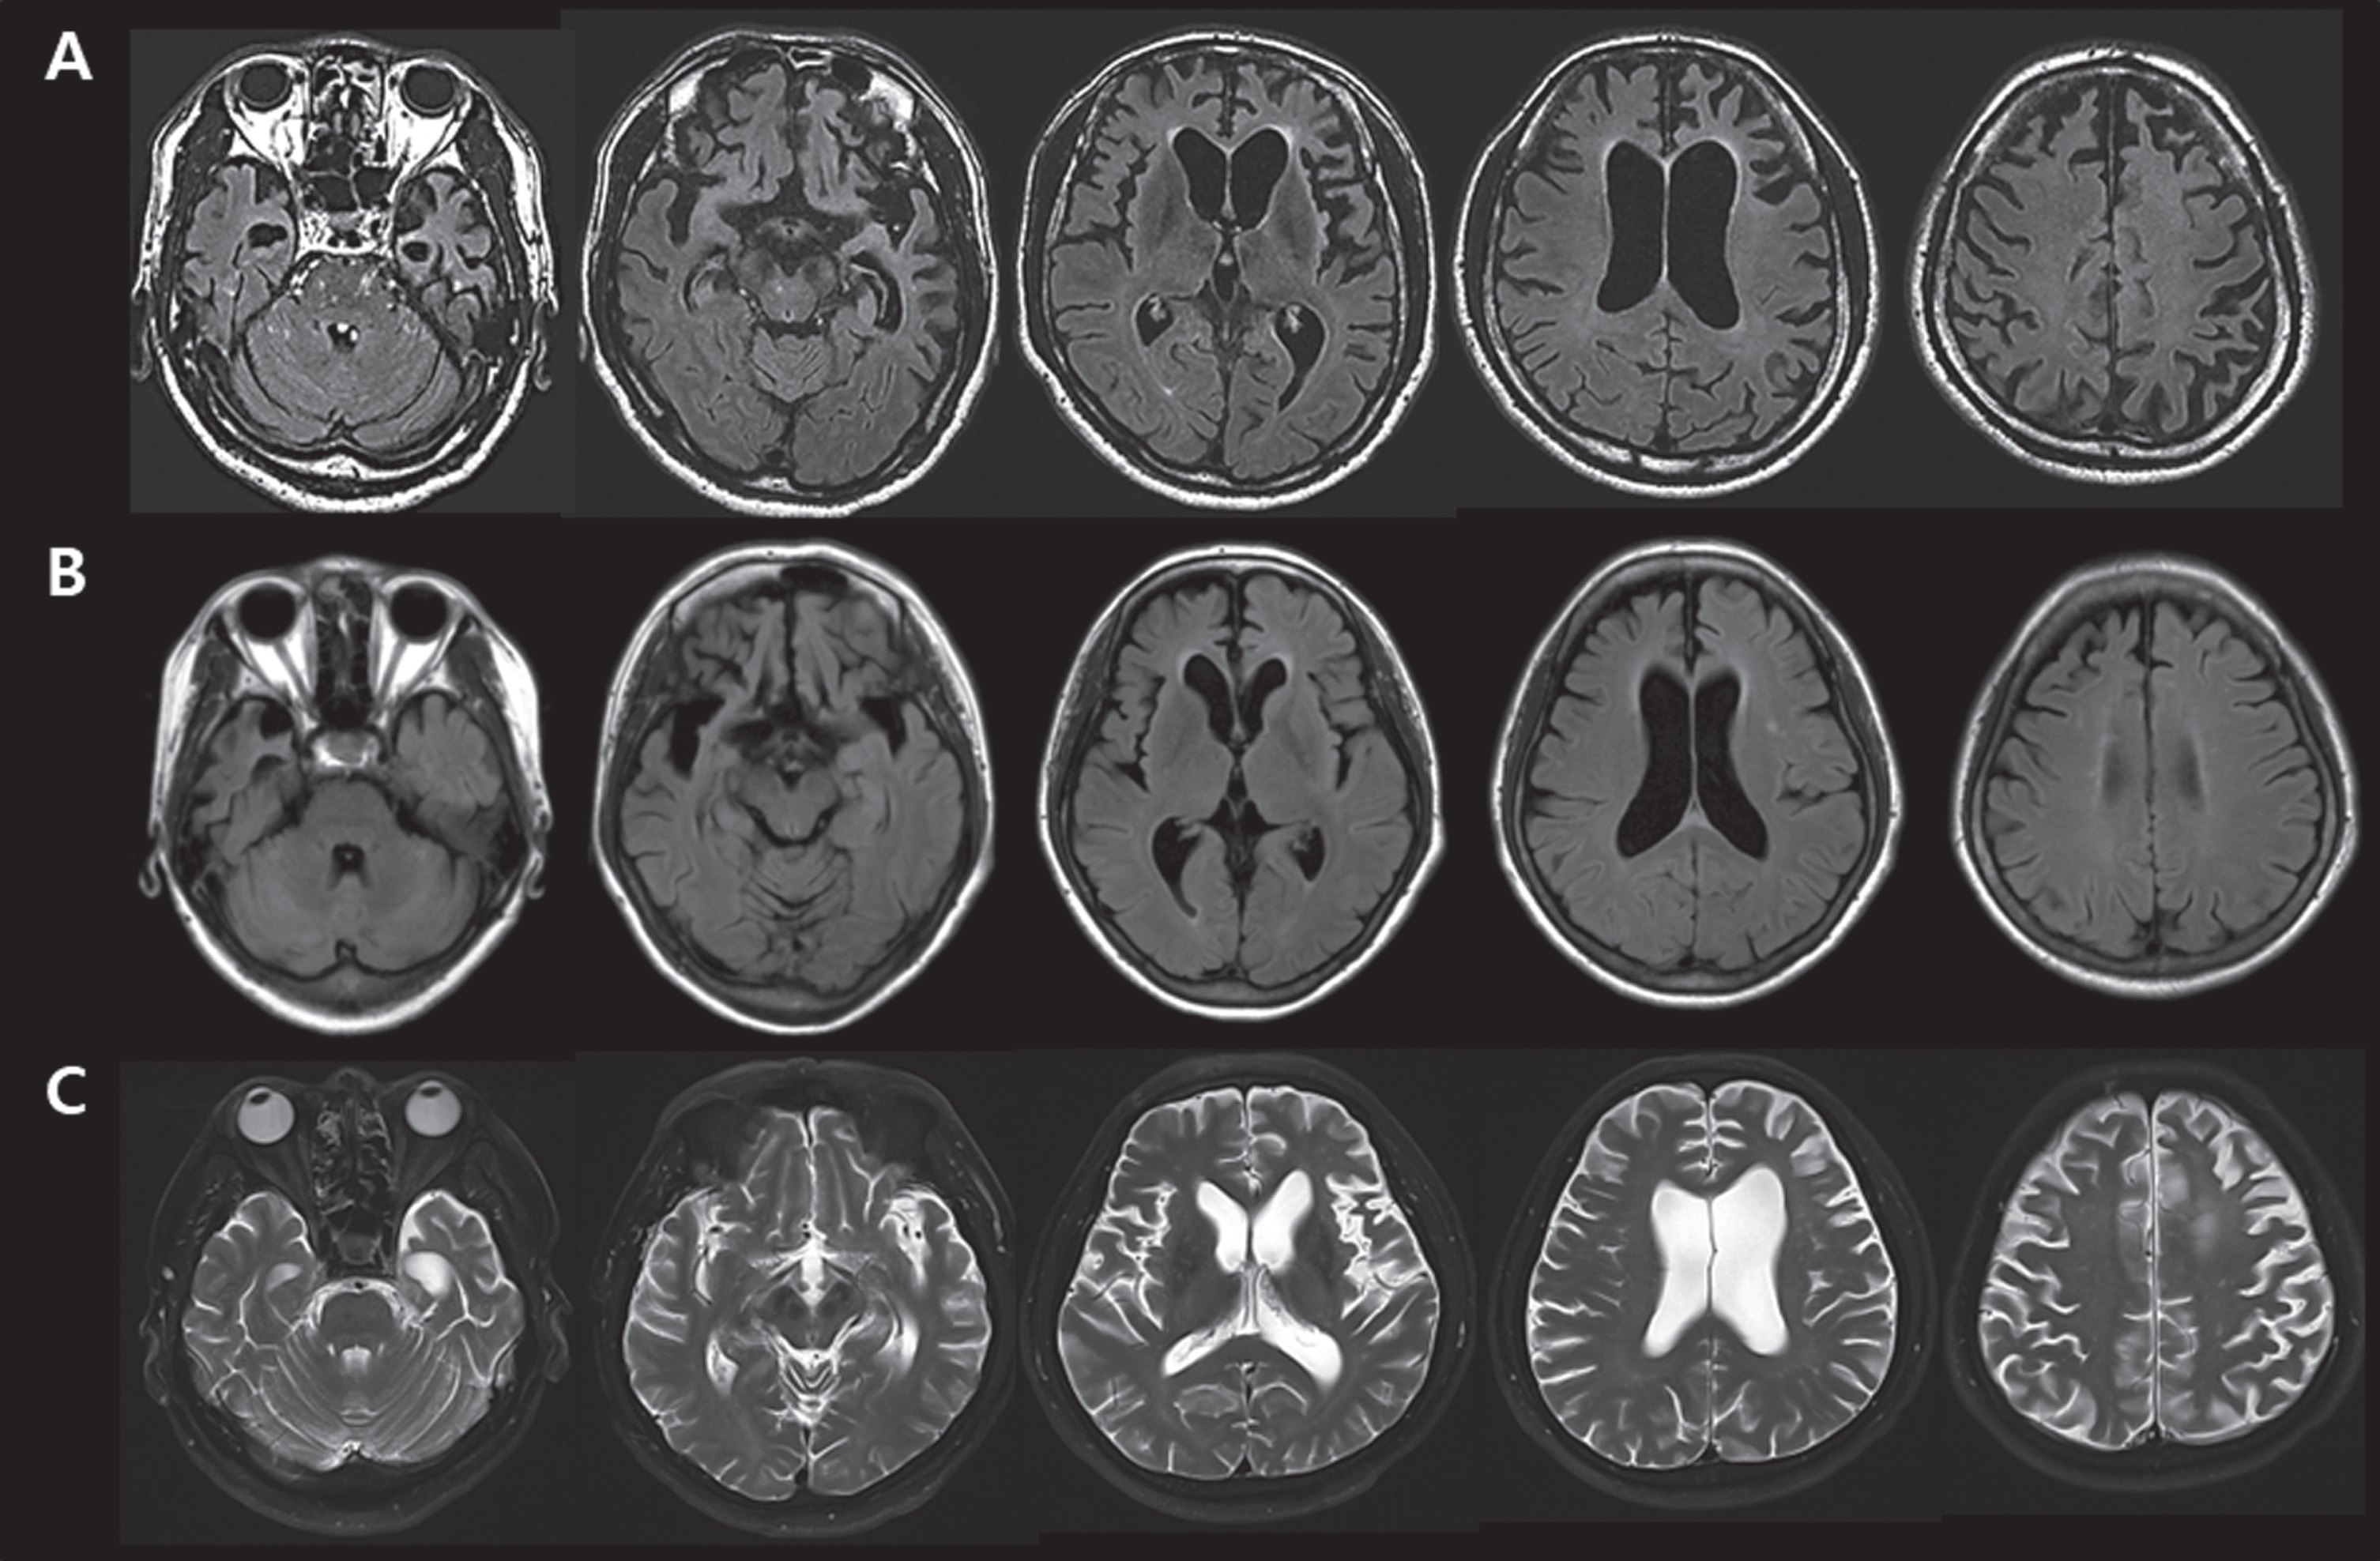 A) Brain MRIs of FTD-36 who carried variant p.R93L of the VCP gene, showing bi-frontotemporal atrophy (worse on the left) and left parietal atrophy. B) Brain MRIs of FTD-48 who carried variant p.S7N of the UBQLN2 gene, variant p.T421M of the PSEN2 gene and variant p.G638S of the GALC gene, revealing right asymmetric frontotemporal atrophy. C) Brain MRIs of FTD-61 who carried variant p.L136S of the APP gene, demonstrating prominent atrophy in the bifrontal and left temporal area.